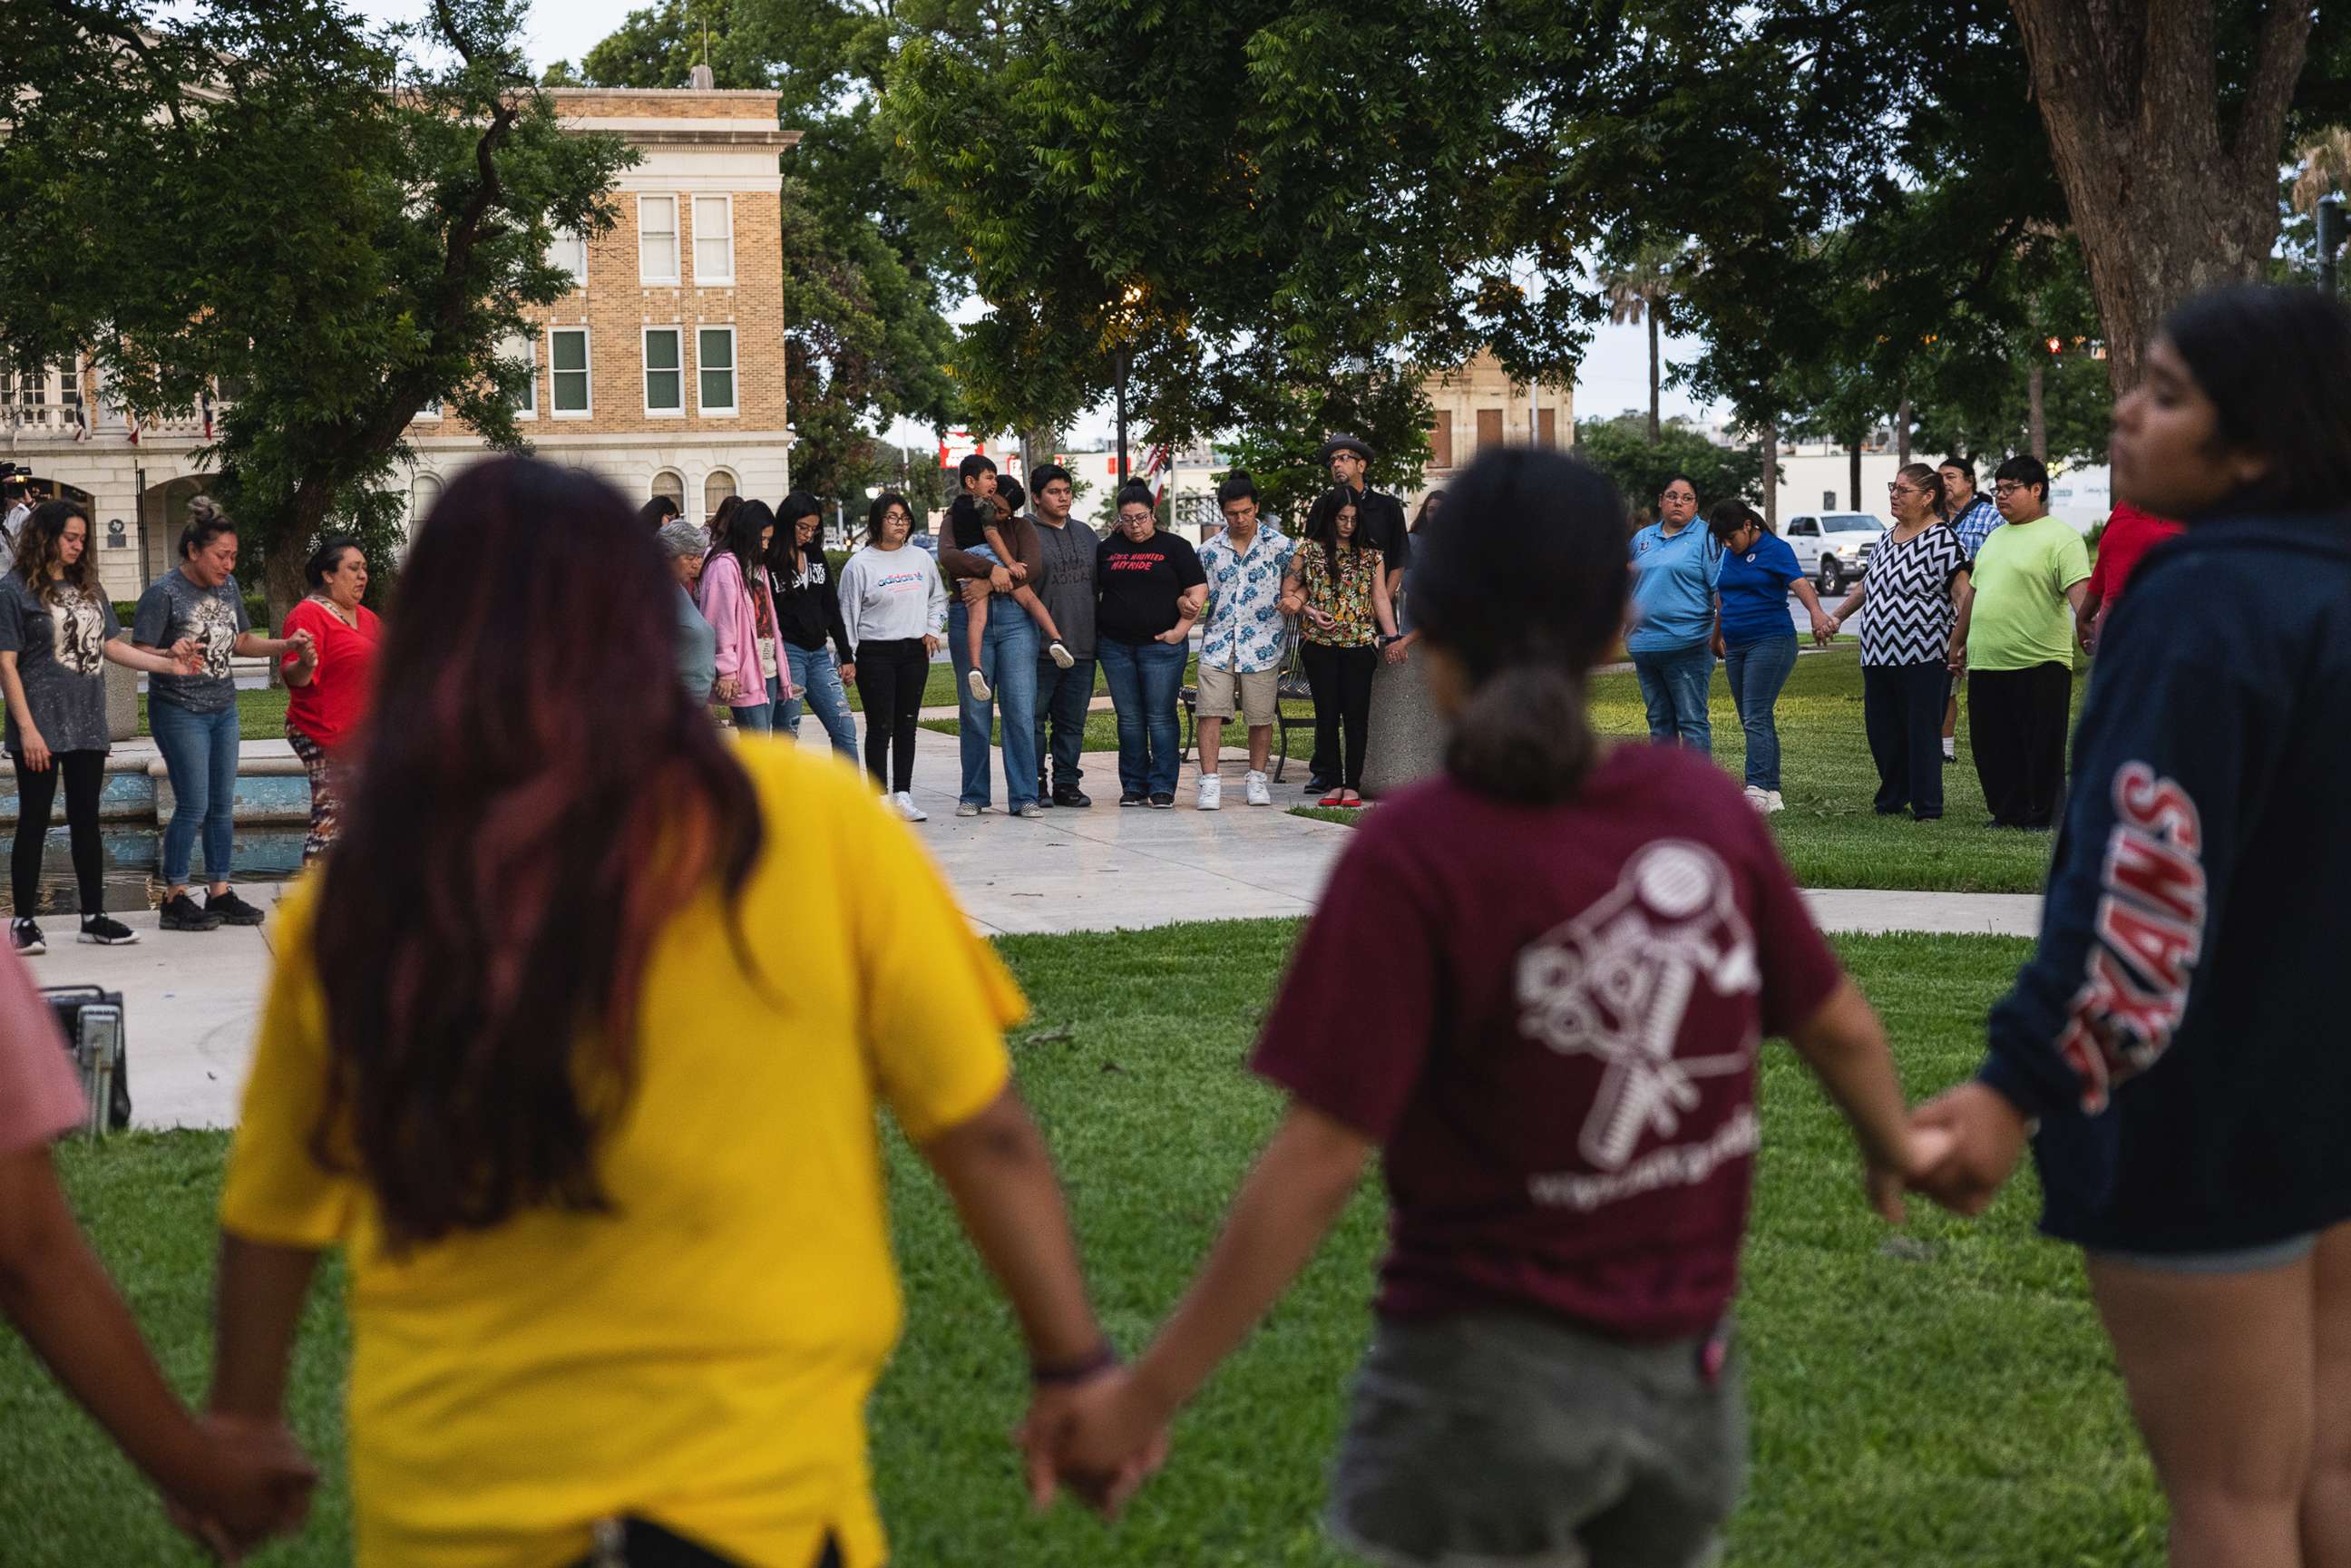 PHOTO: Members of the community gather at the City of Uvalde Town Square for a prayer vigil in the wake of a mass shooting at Robb Elementary School, May 24, 2022, in Uvalde, Texas.